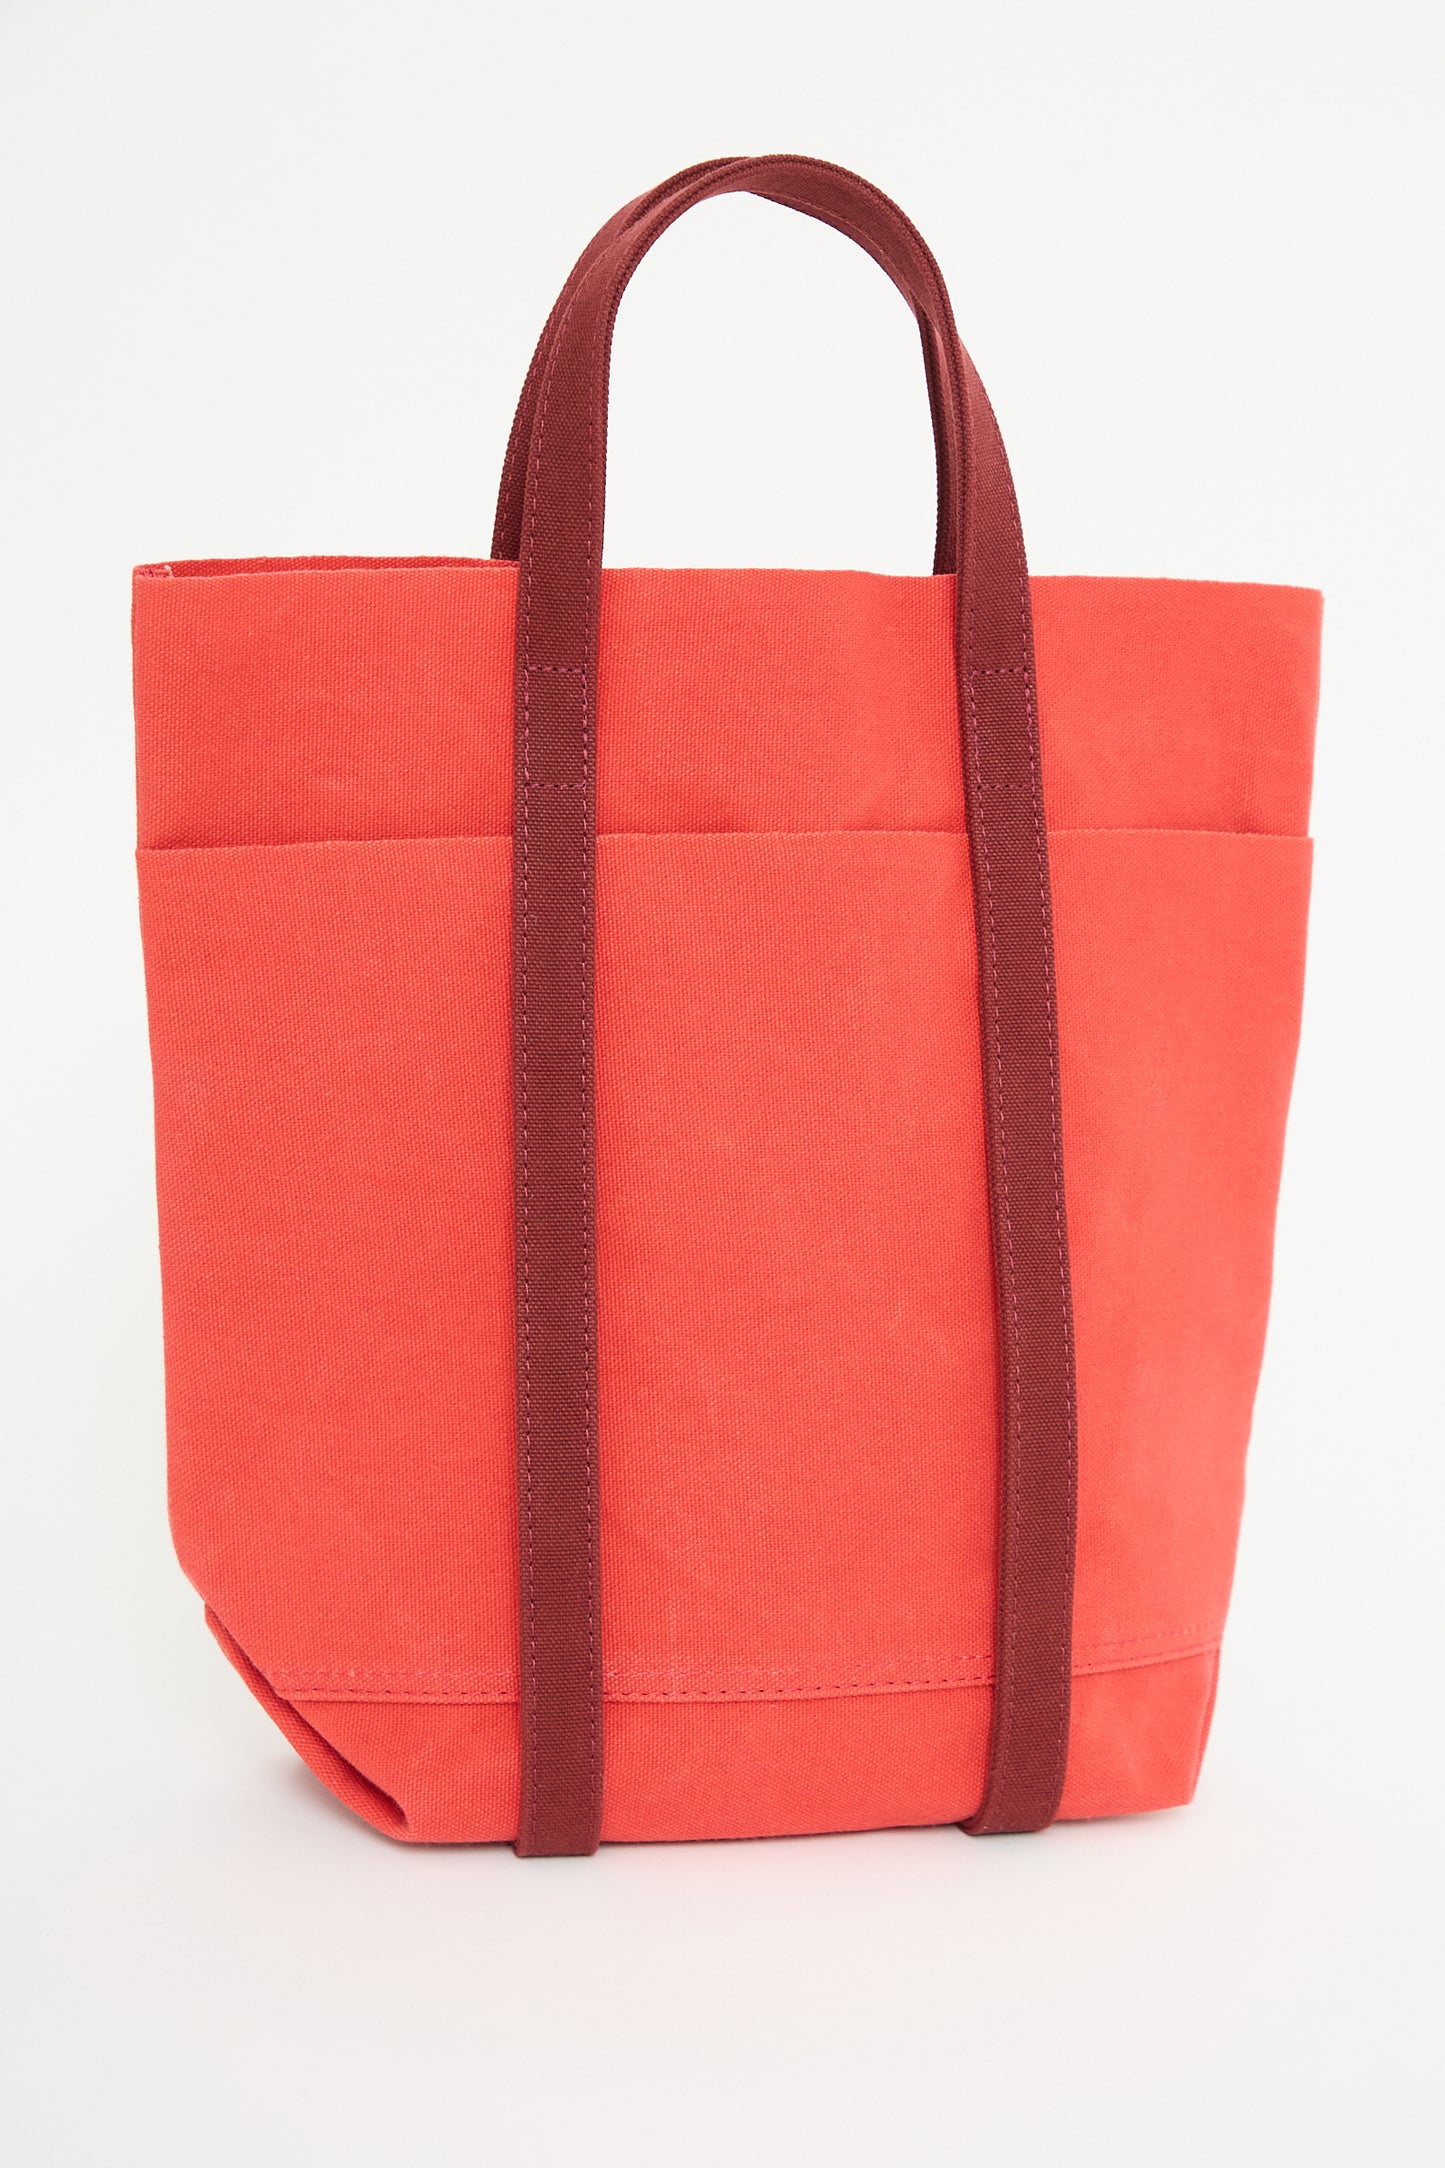 Amiacalva Light Ounce Canvas Tote in Scarlet and Burgundy with brown handles on a white background.